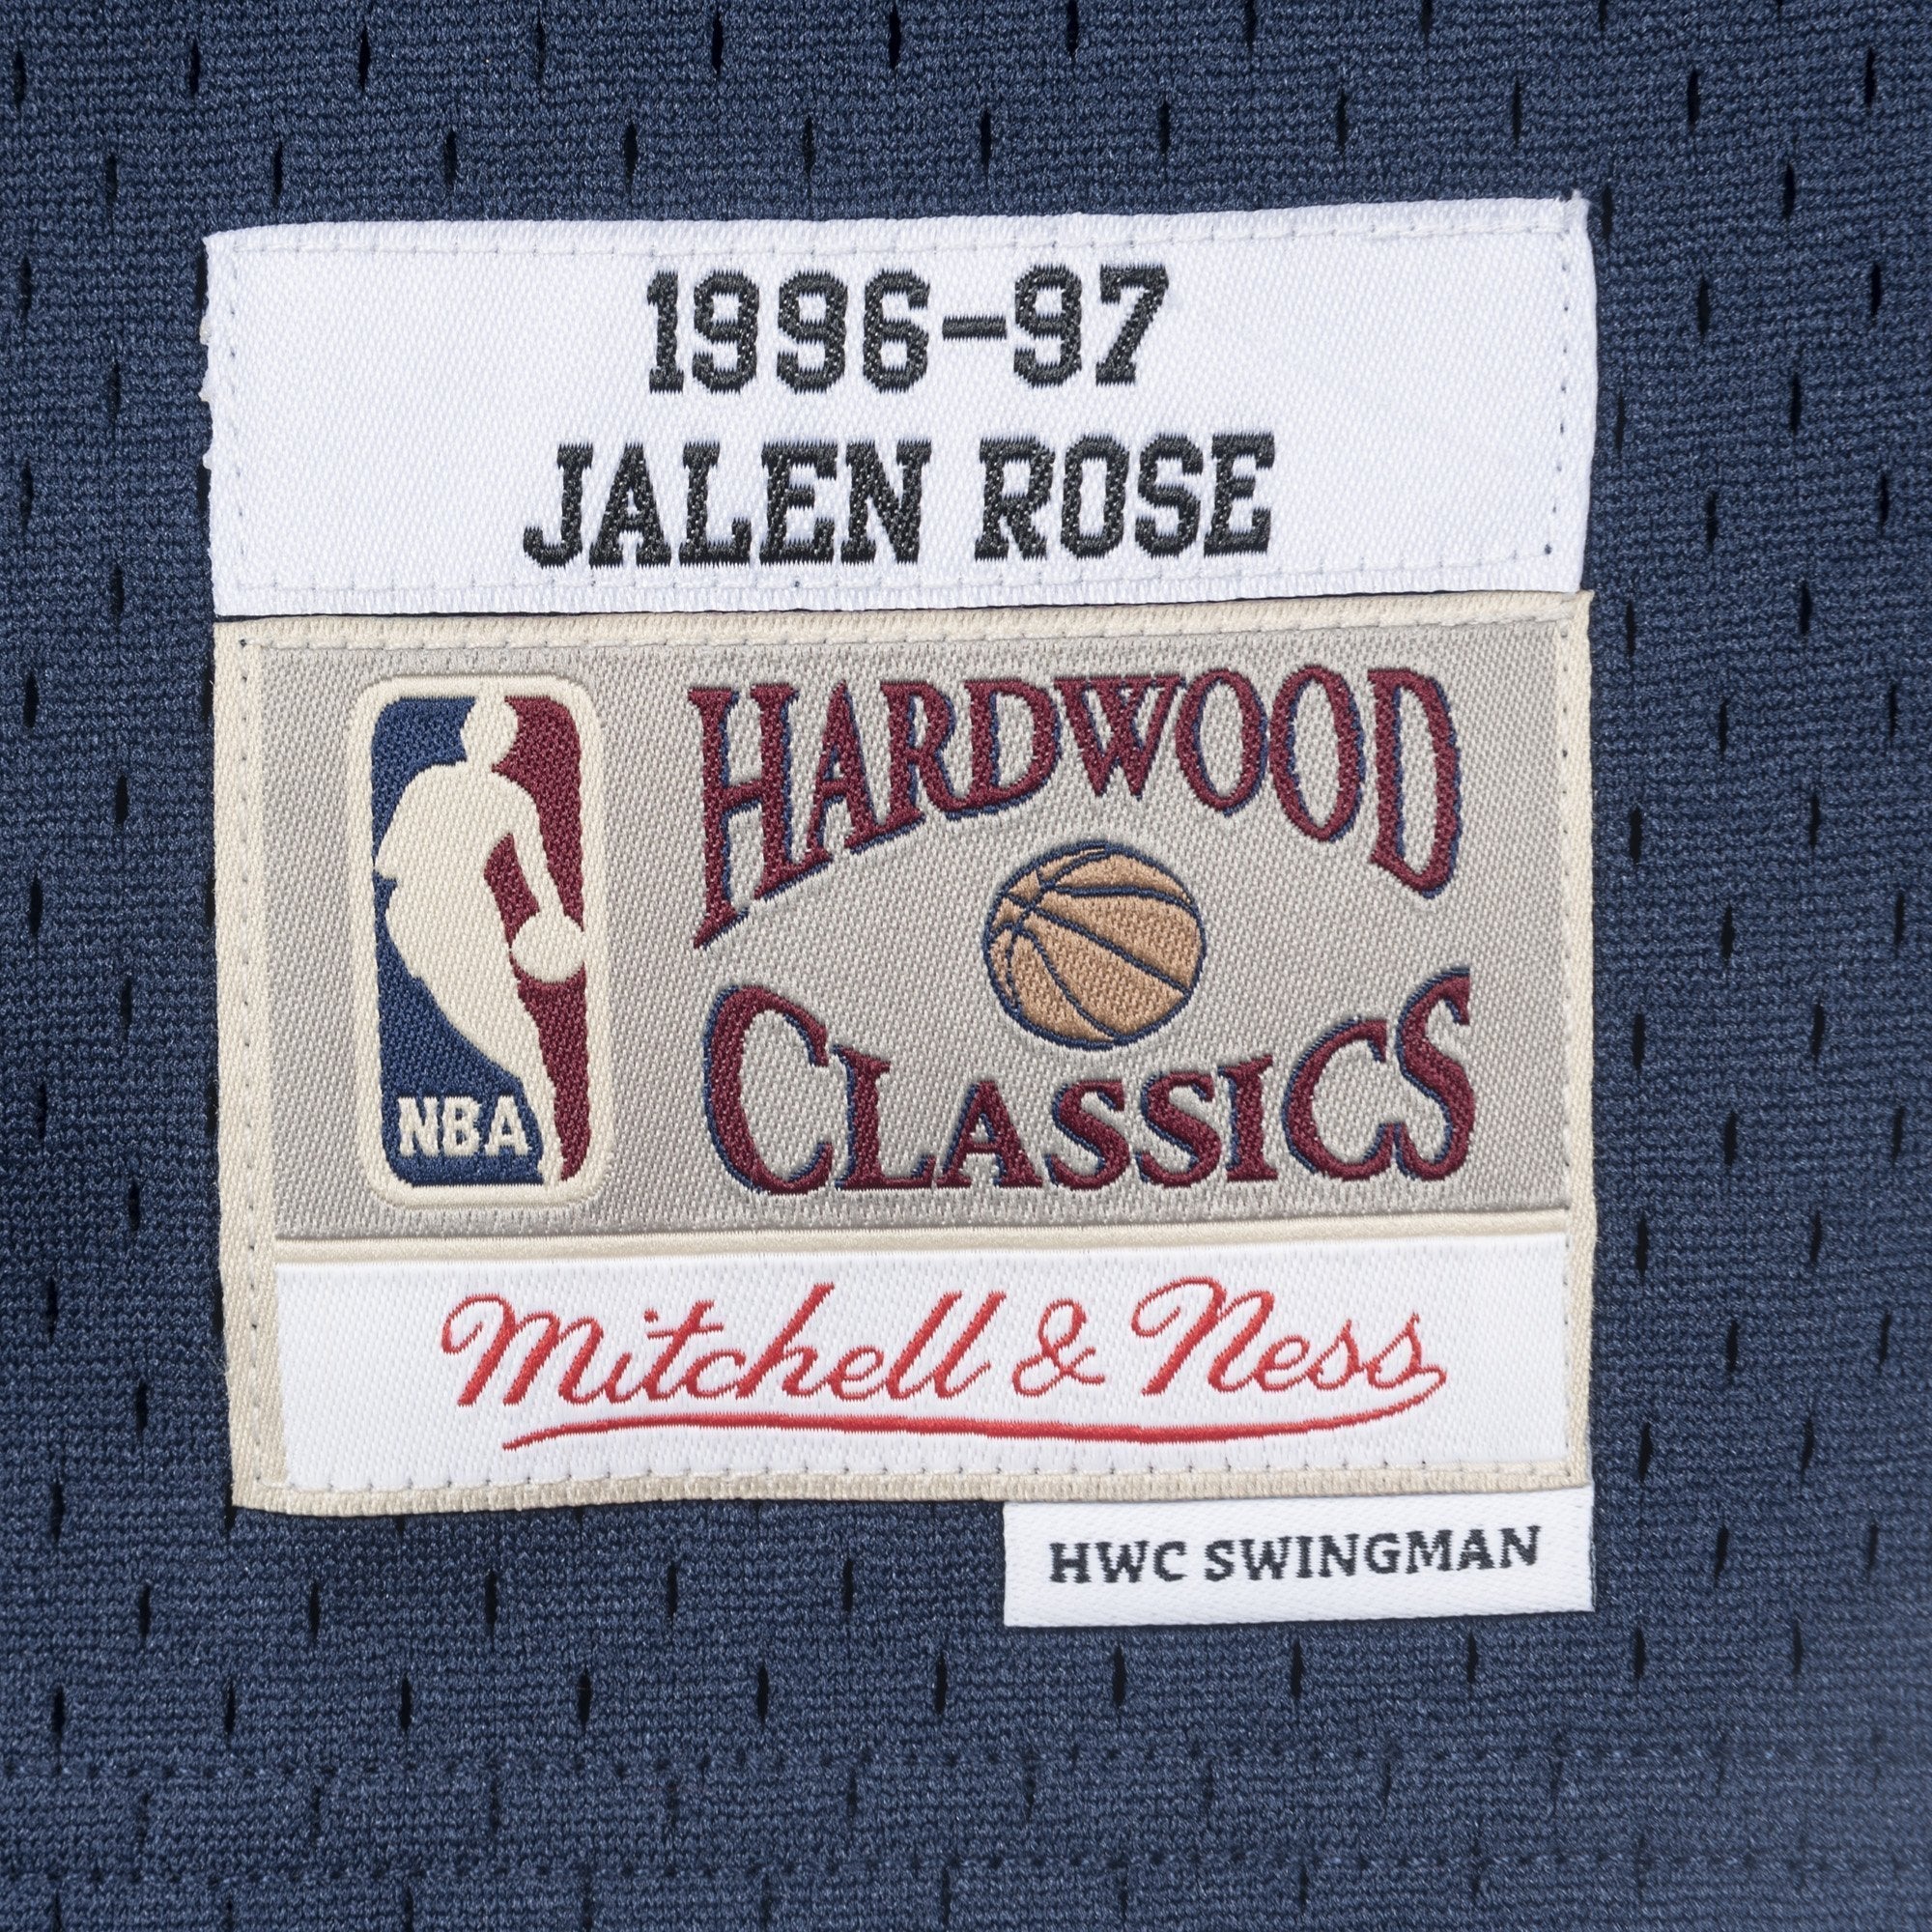 mitchell-and-ness-swingman-jalen-rose-indiana-pacers-nba-1996-97-jersey-smjyac18089-ipanavy96jrs